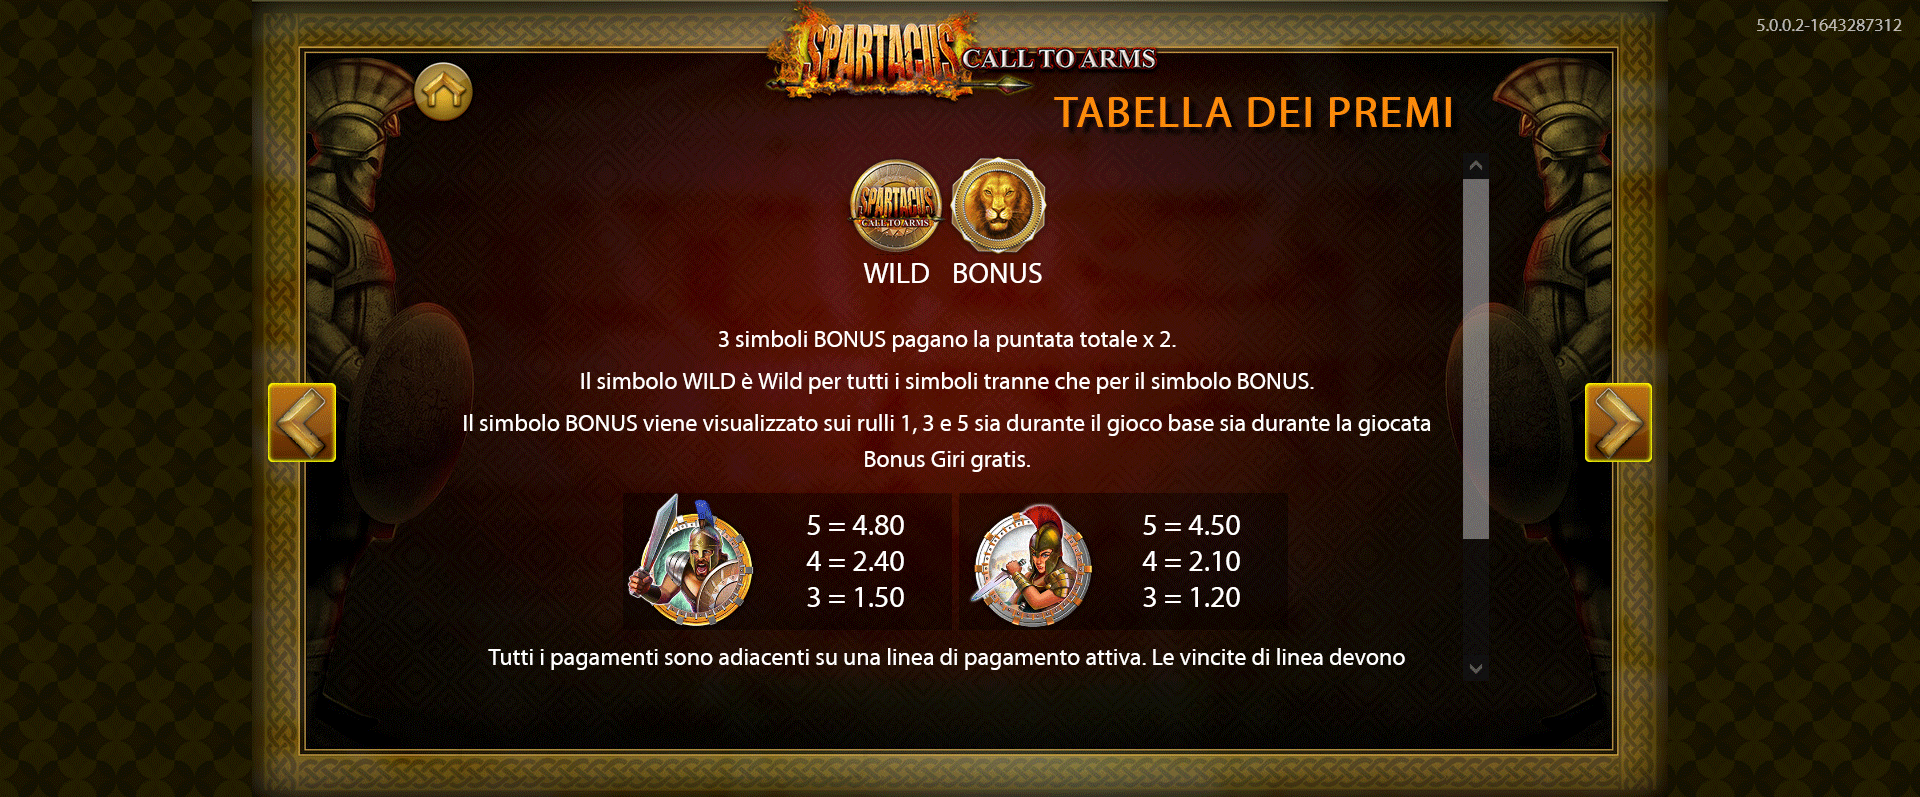 paytable della slot machine spartacus call to arms